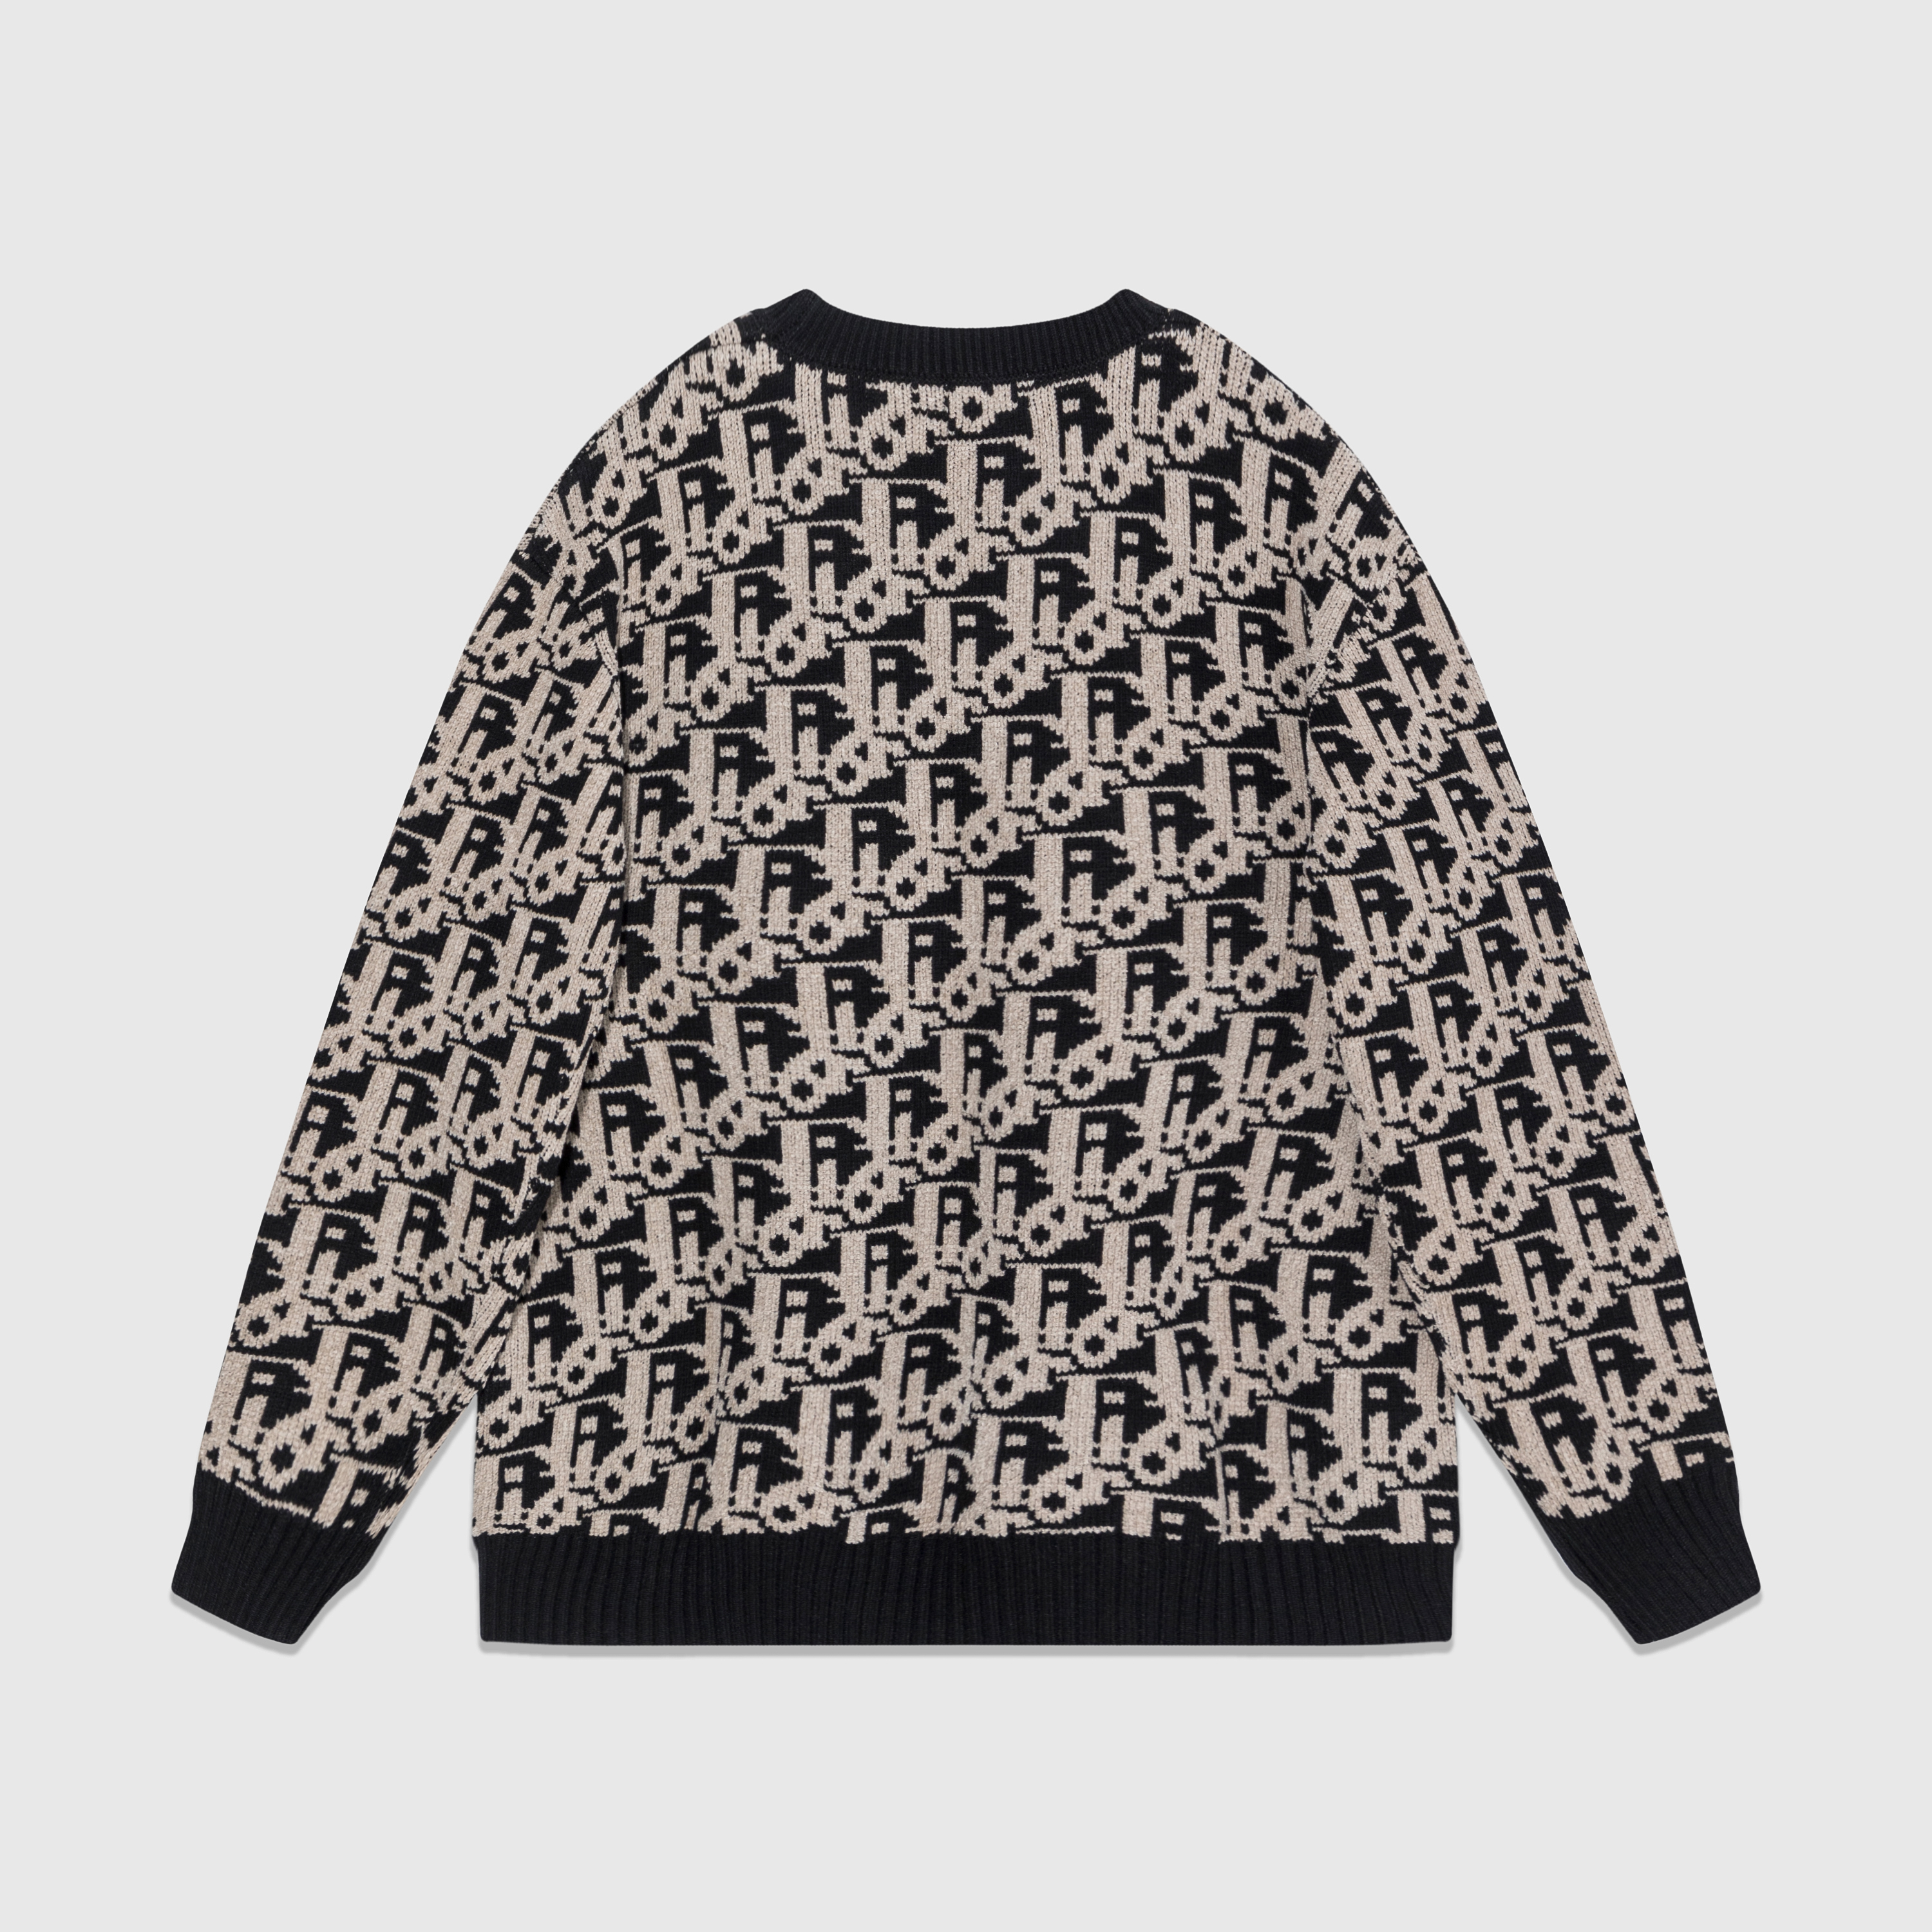 Dior Sweaters Unisex # 261877, cheap Dior Sweaters, only $49!